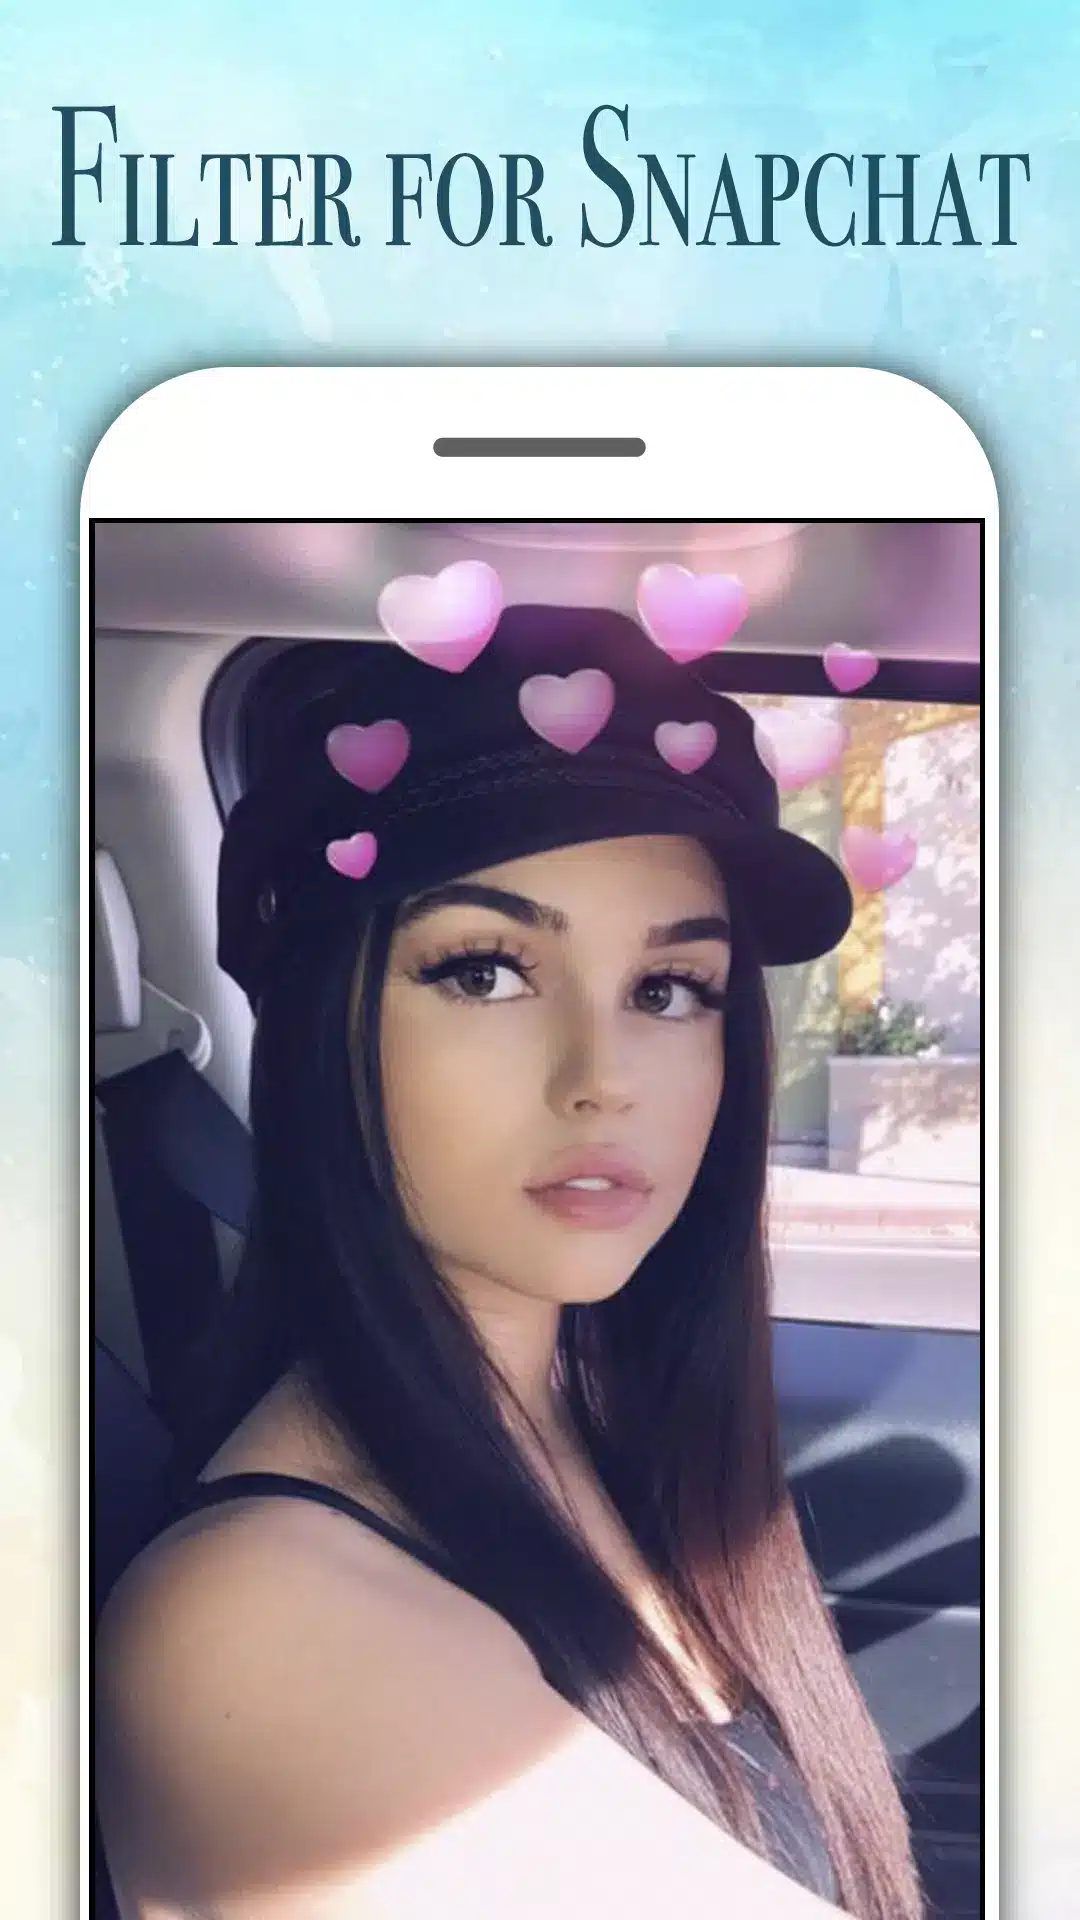 Filter for Snapchat Image 2